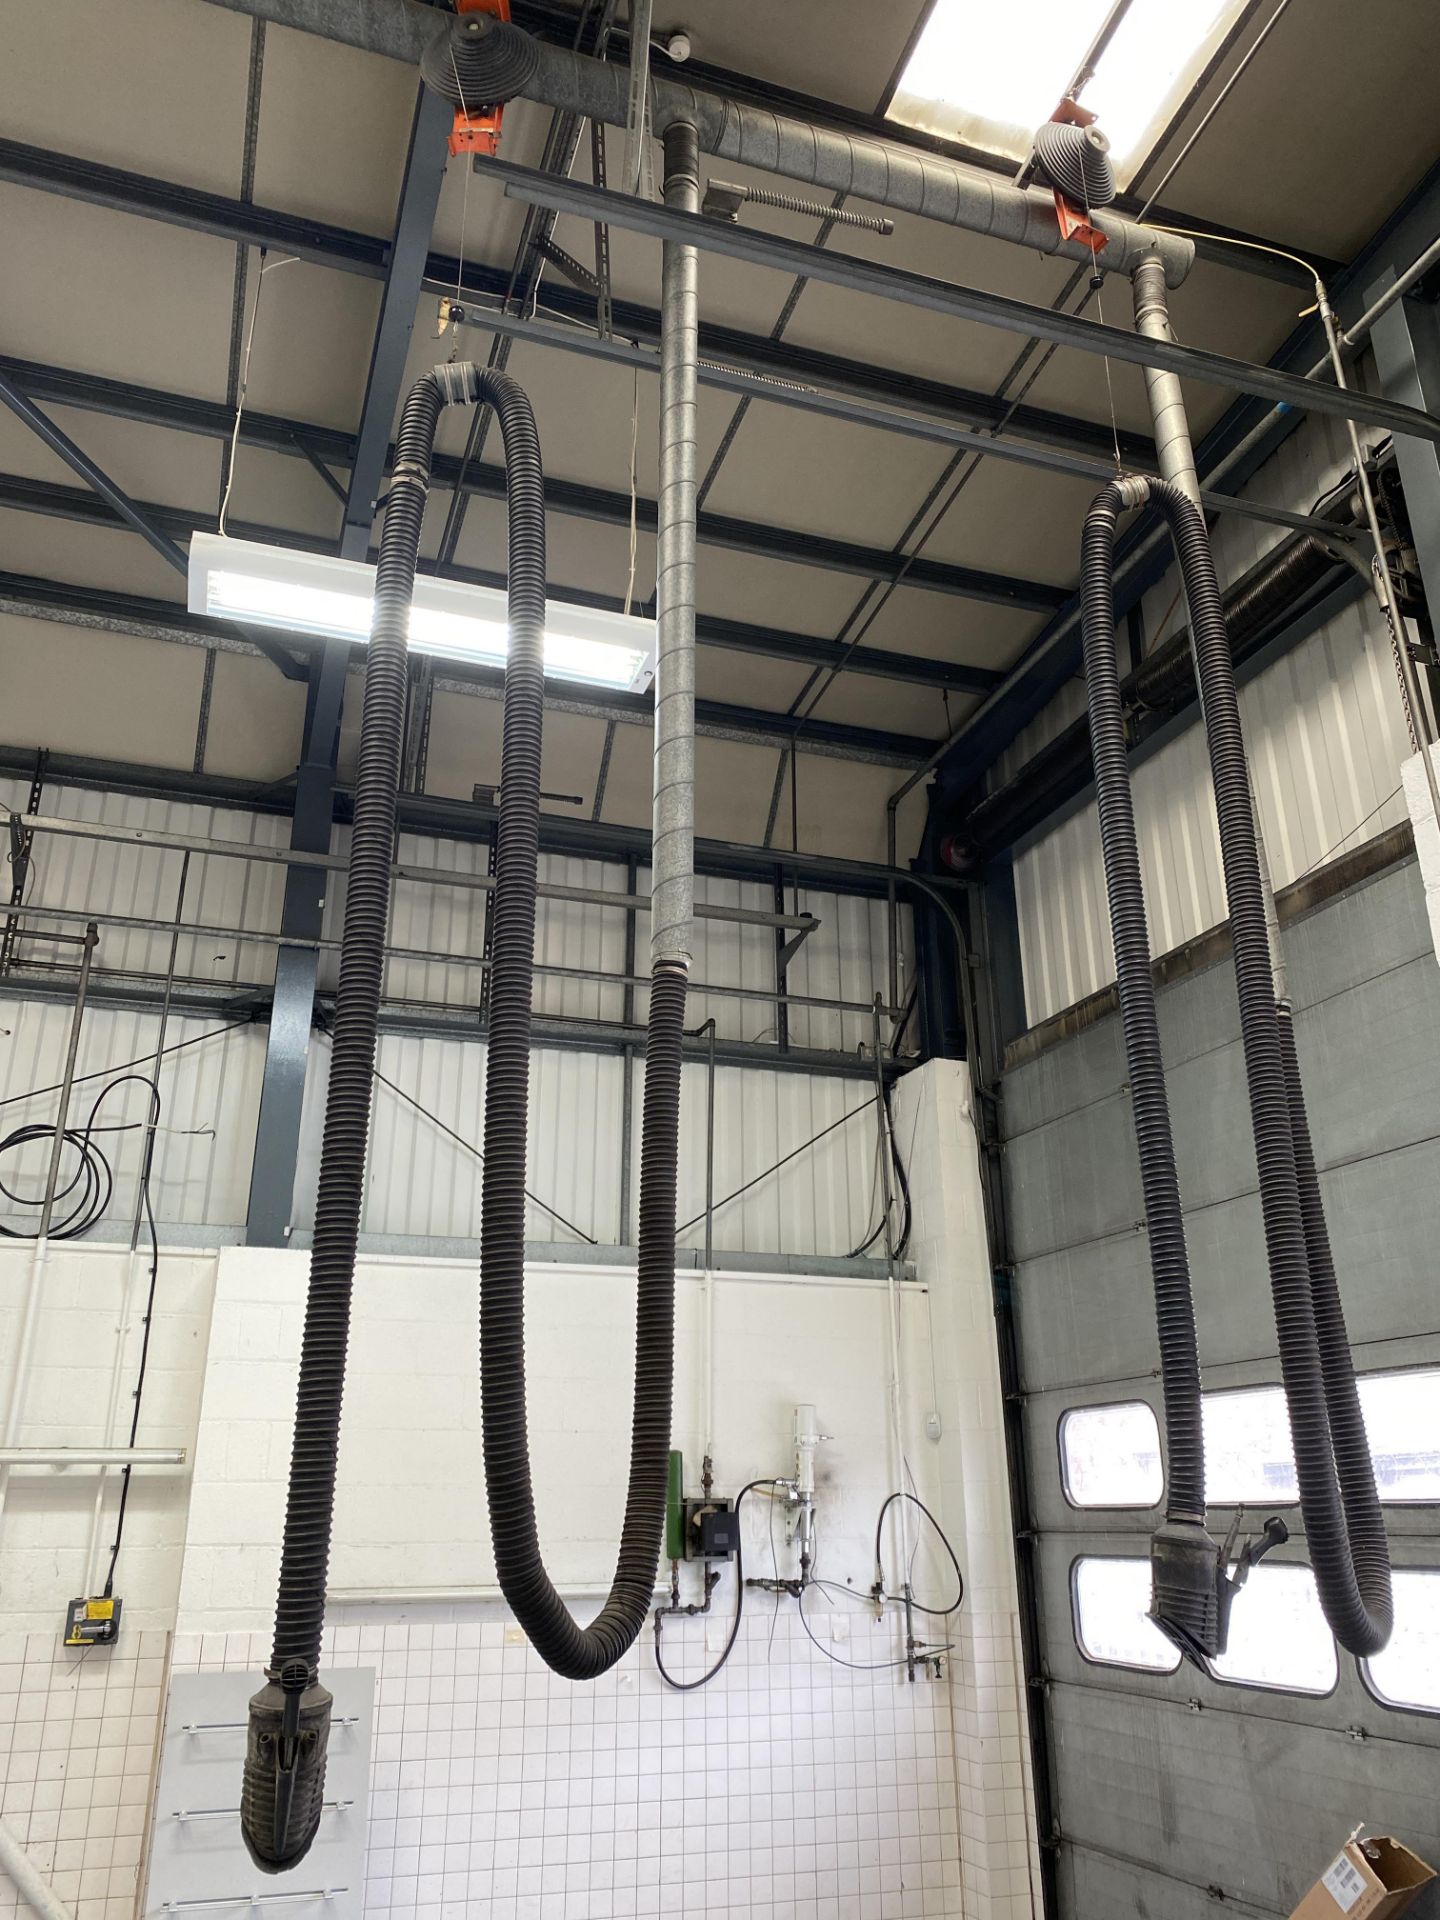 7 x Exhaust Extraction Nozzles and Ducting from a Ceiling Mounted Exhaust Extraction System. - Image 2 of 5